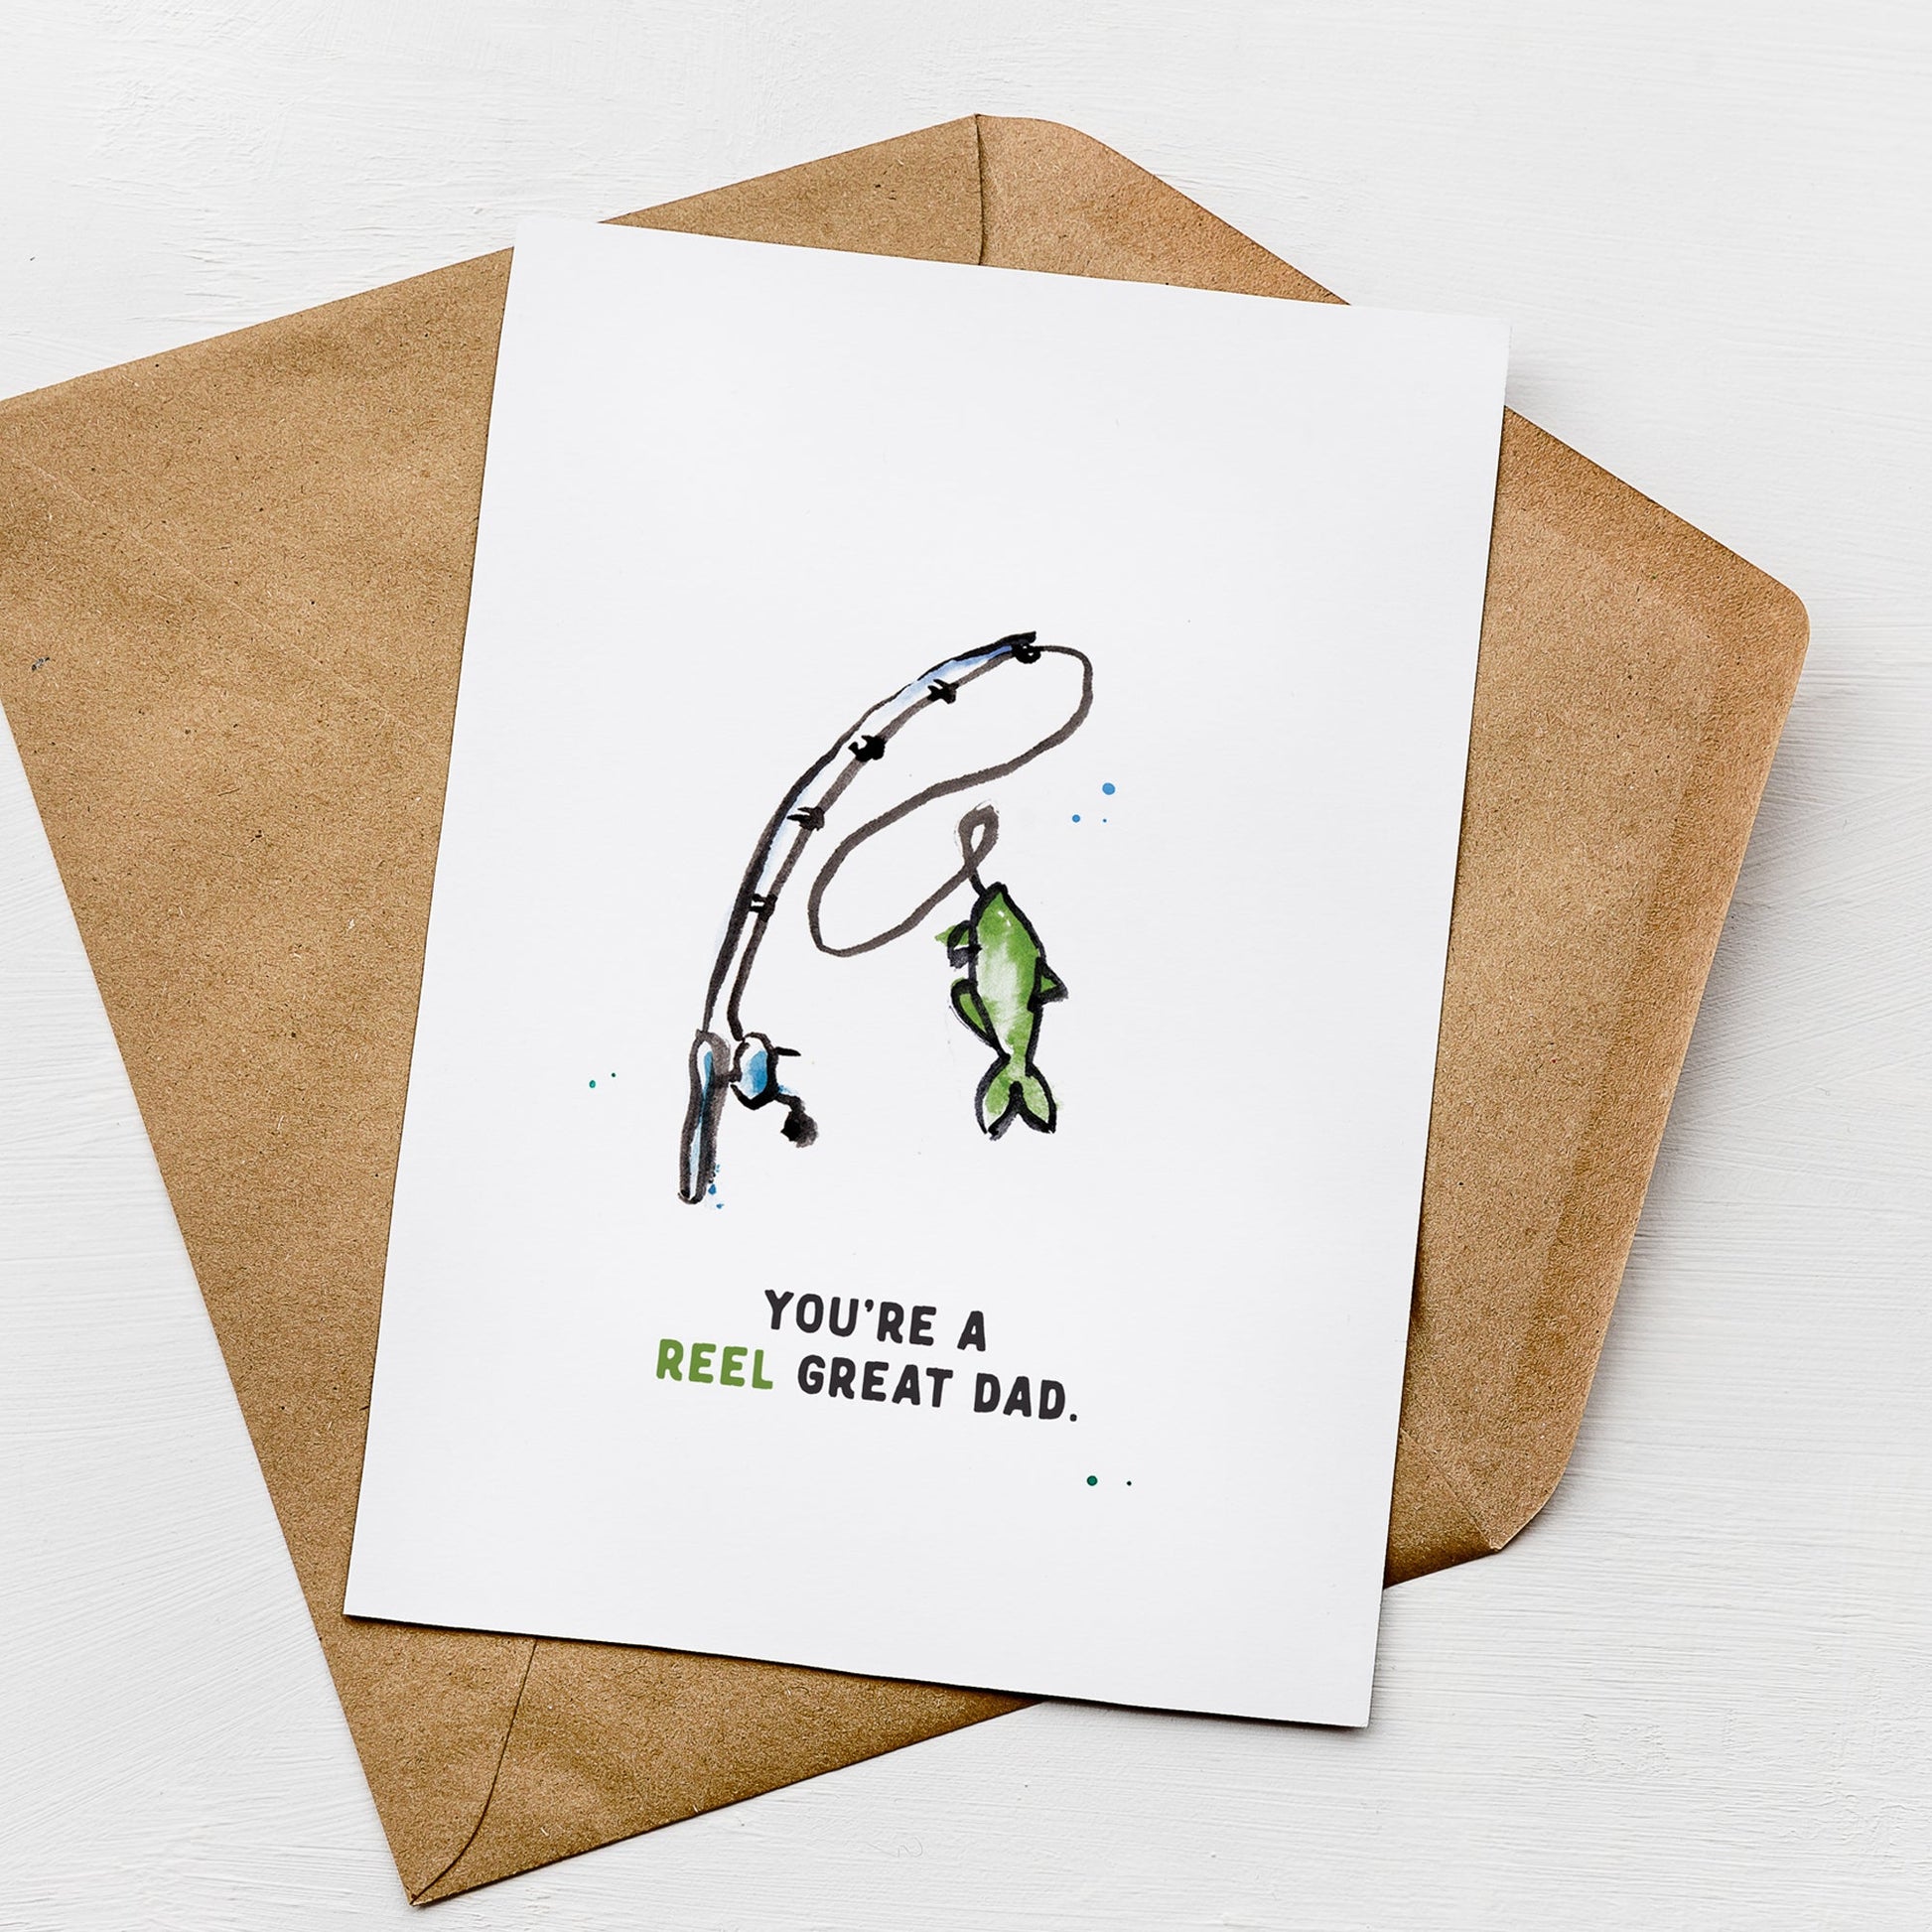 Reel Great Dad Card - Fishing Father's Day Card - Birthday Card for Dad - Moon Rock Prints